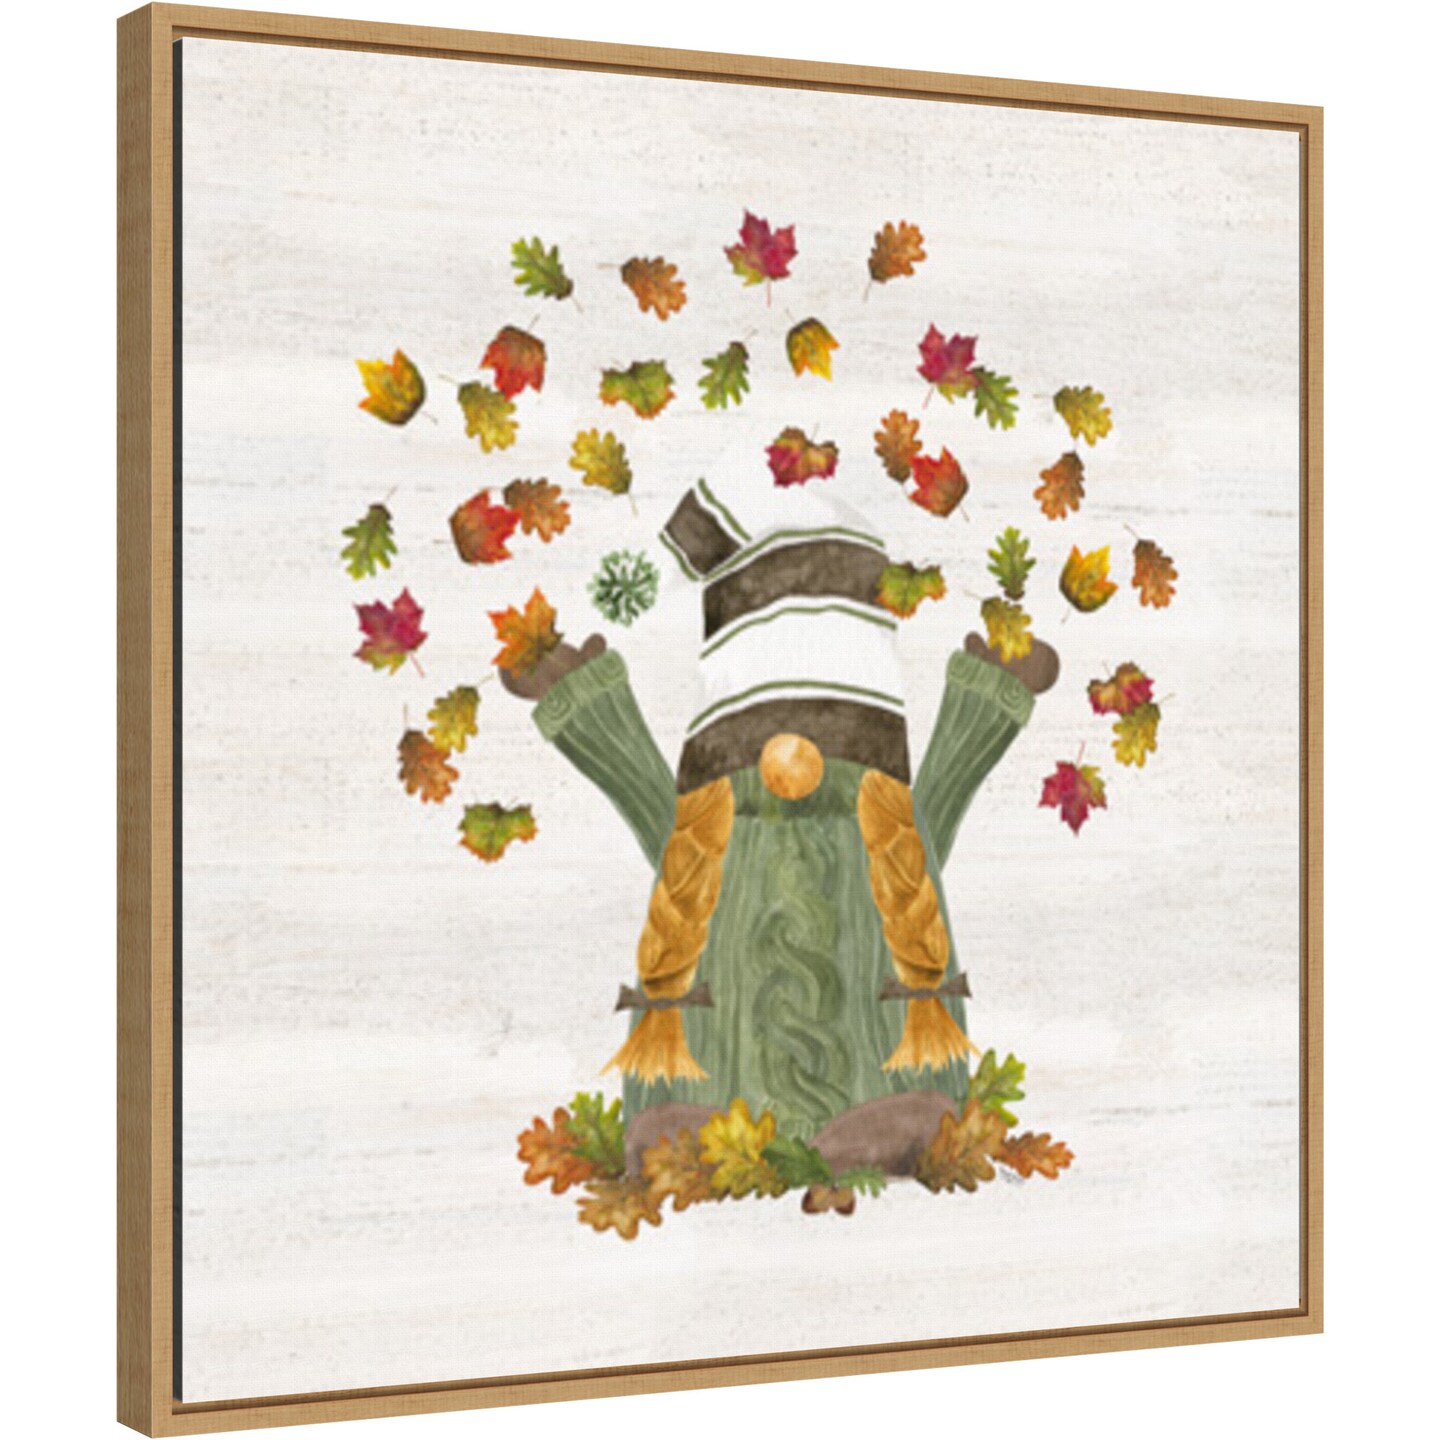 Fall Gnomes VI by Tara Reed 22-in. W x 22-in. H. Canvas Wall Art Print Framed in Natural